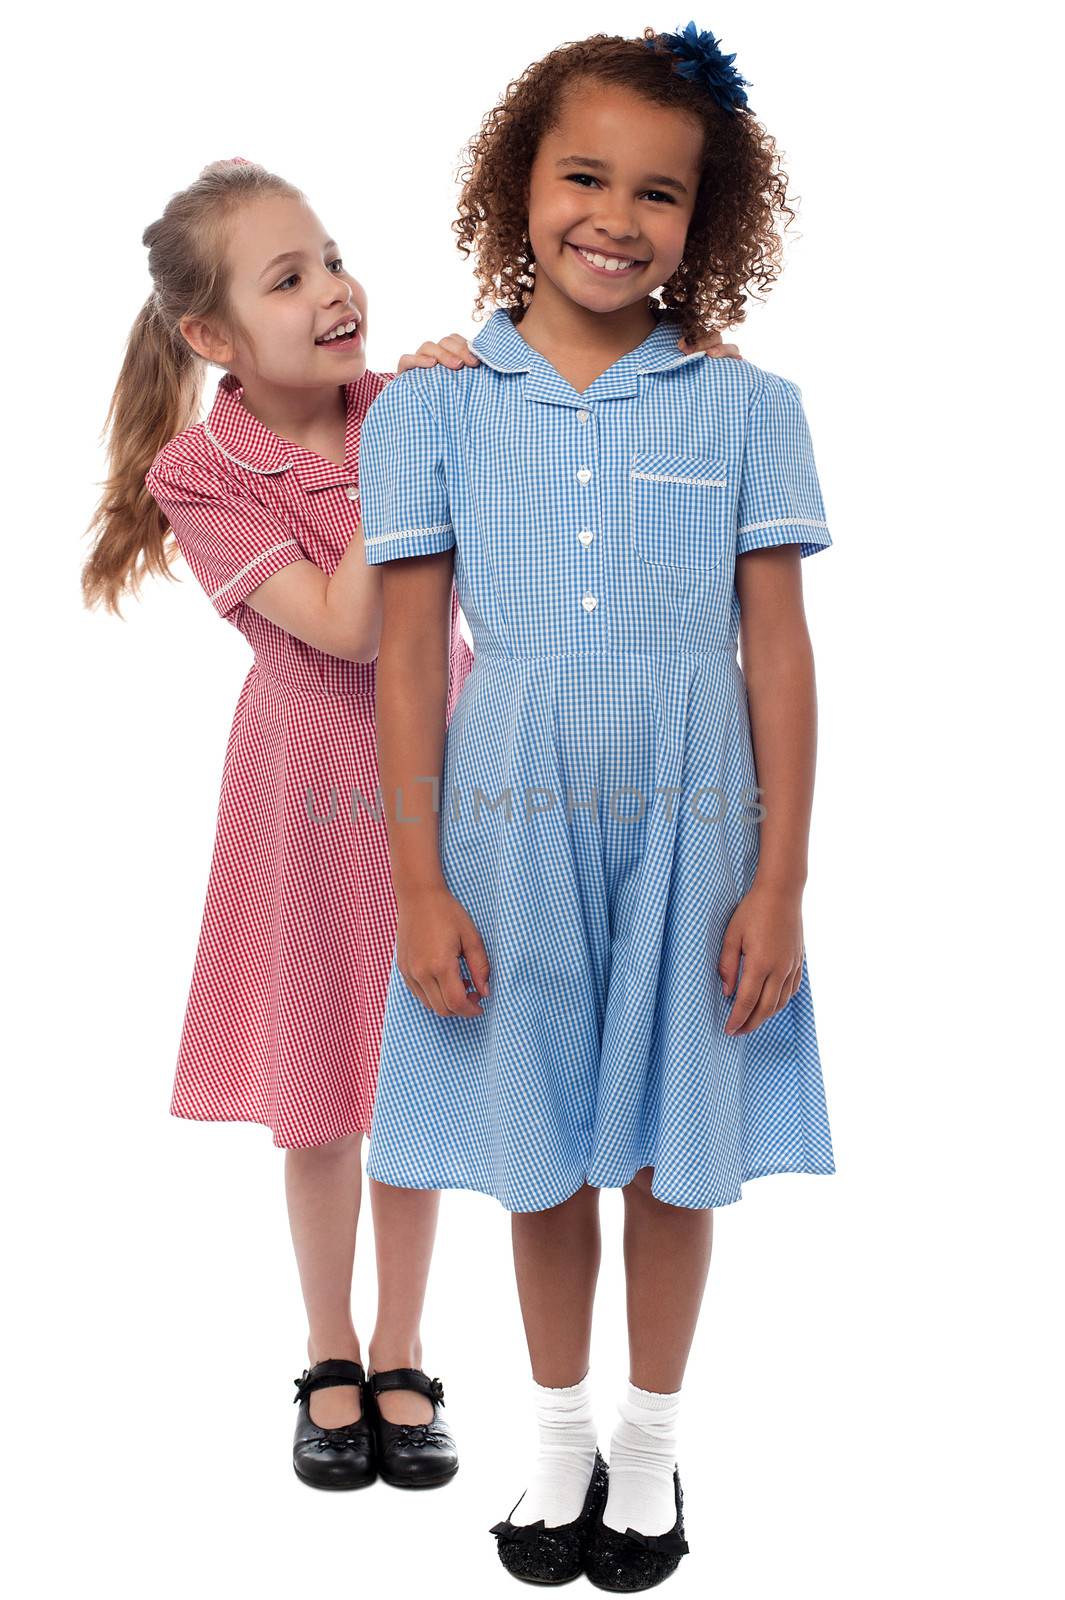 Two joyous elementary school girls by stockyimages